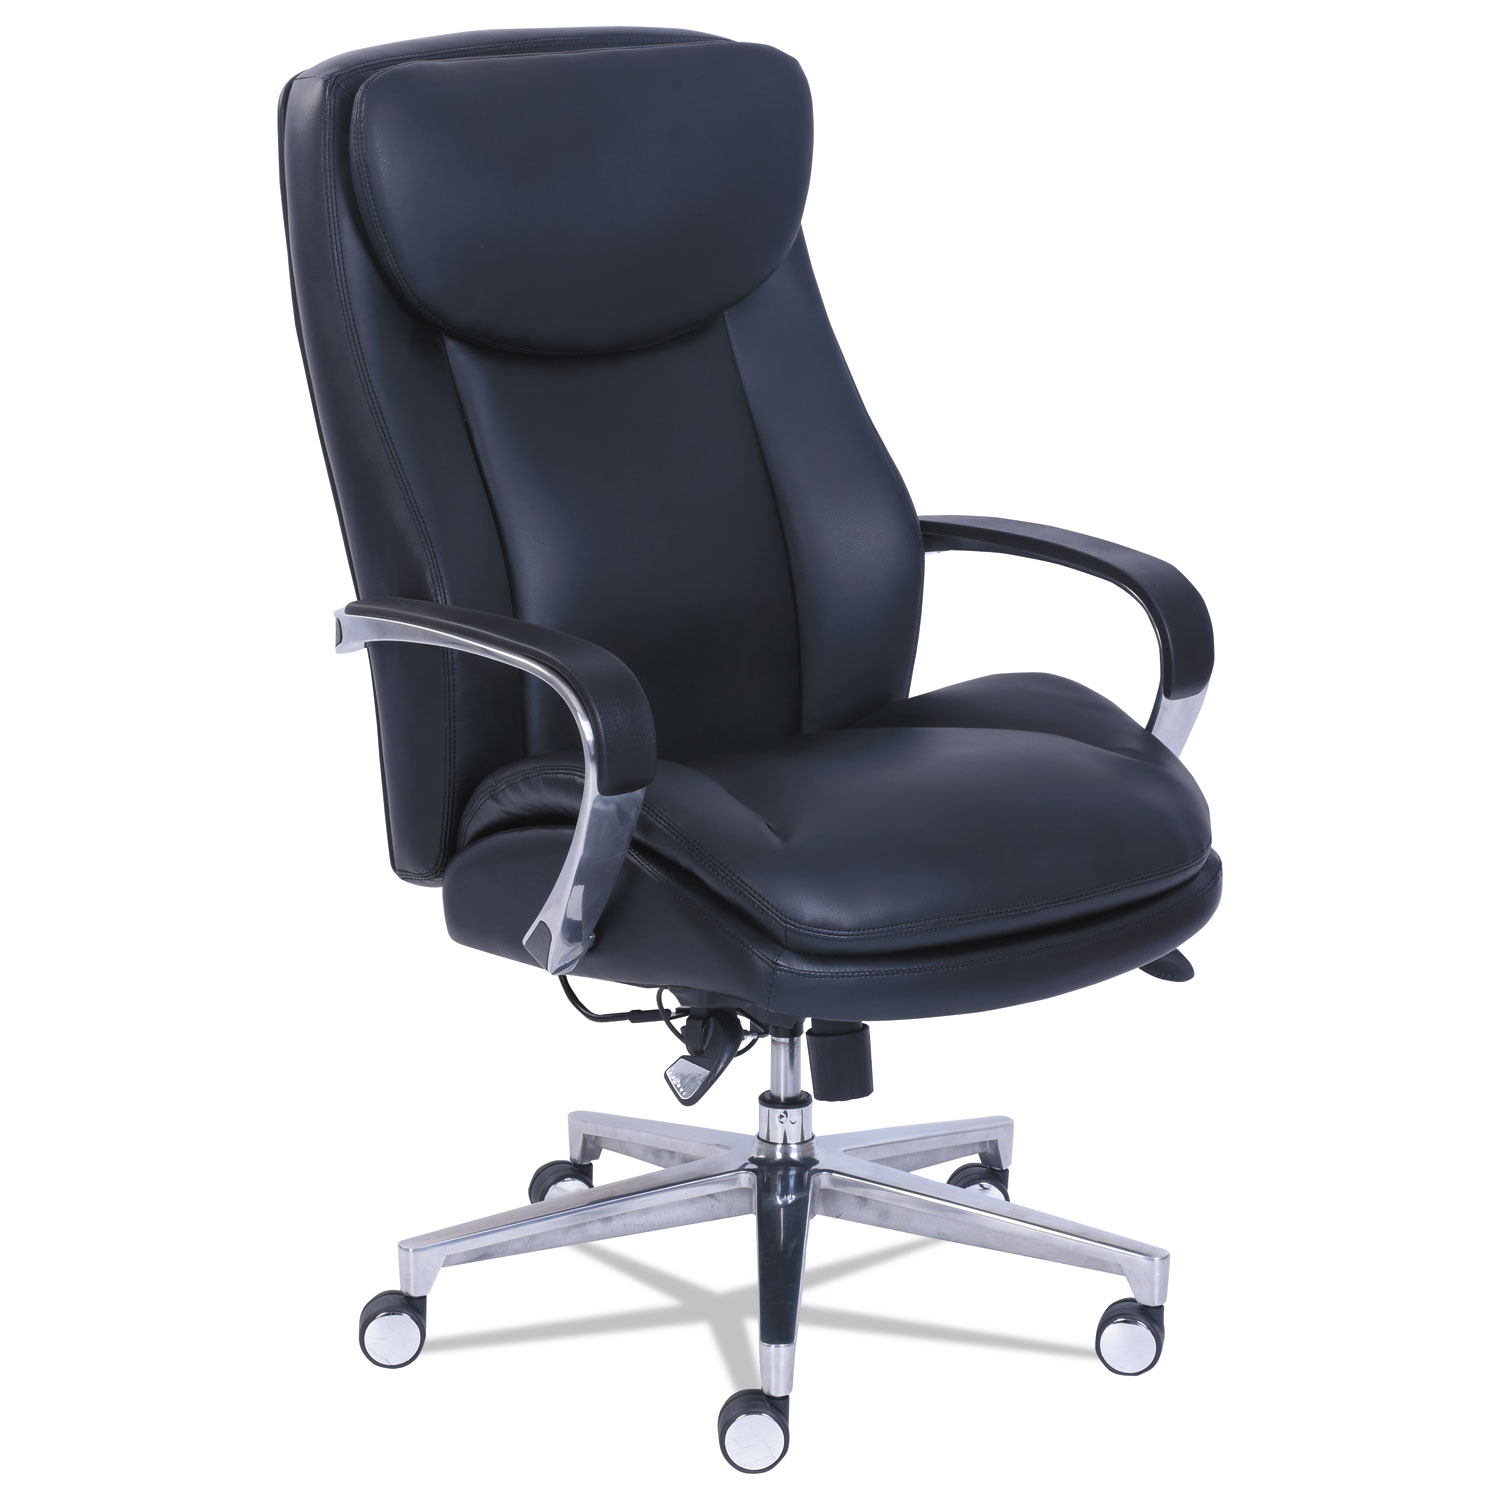 Commercial 2000 High-Back Executive Chair with Dynamic Lumbar Support, Black